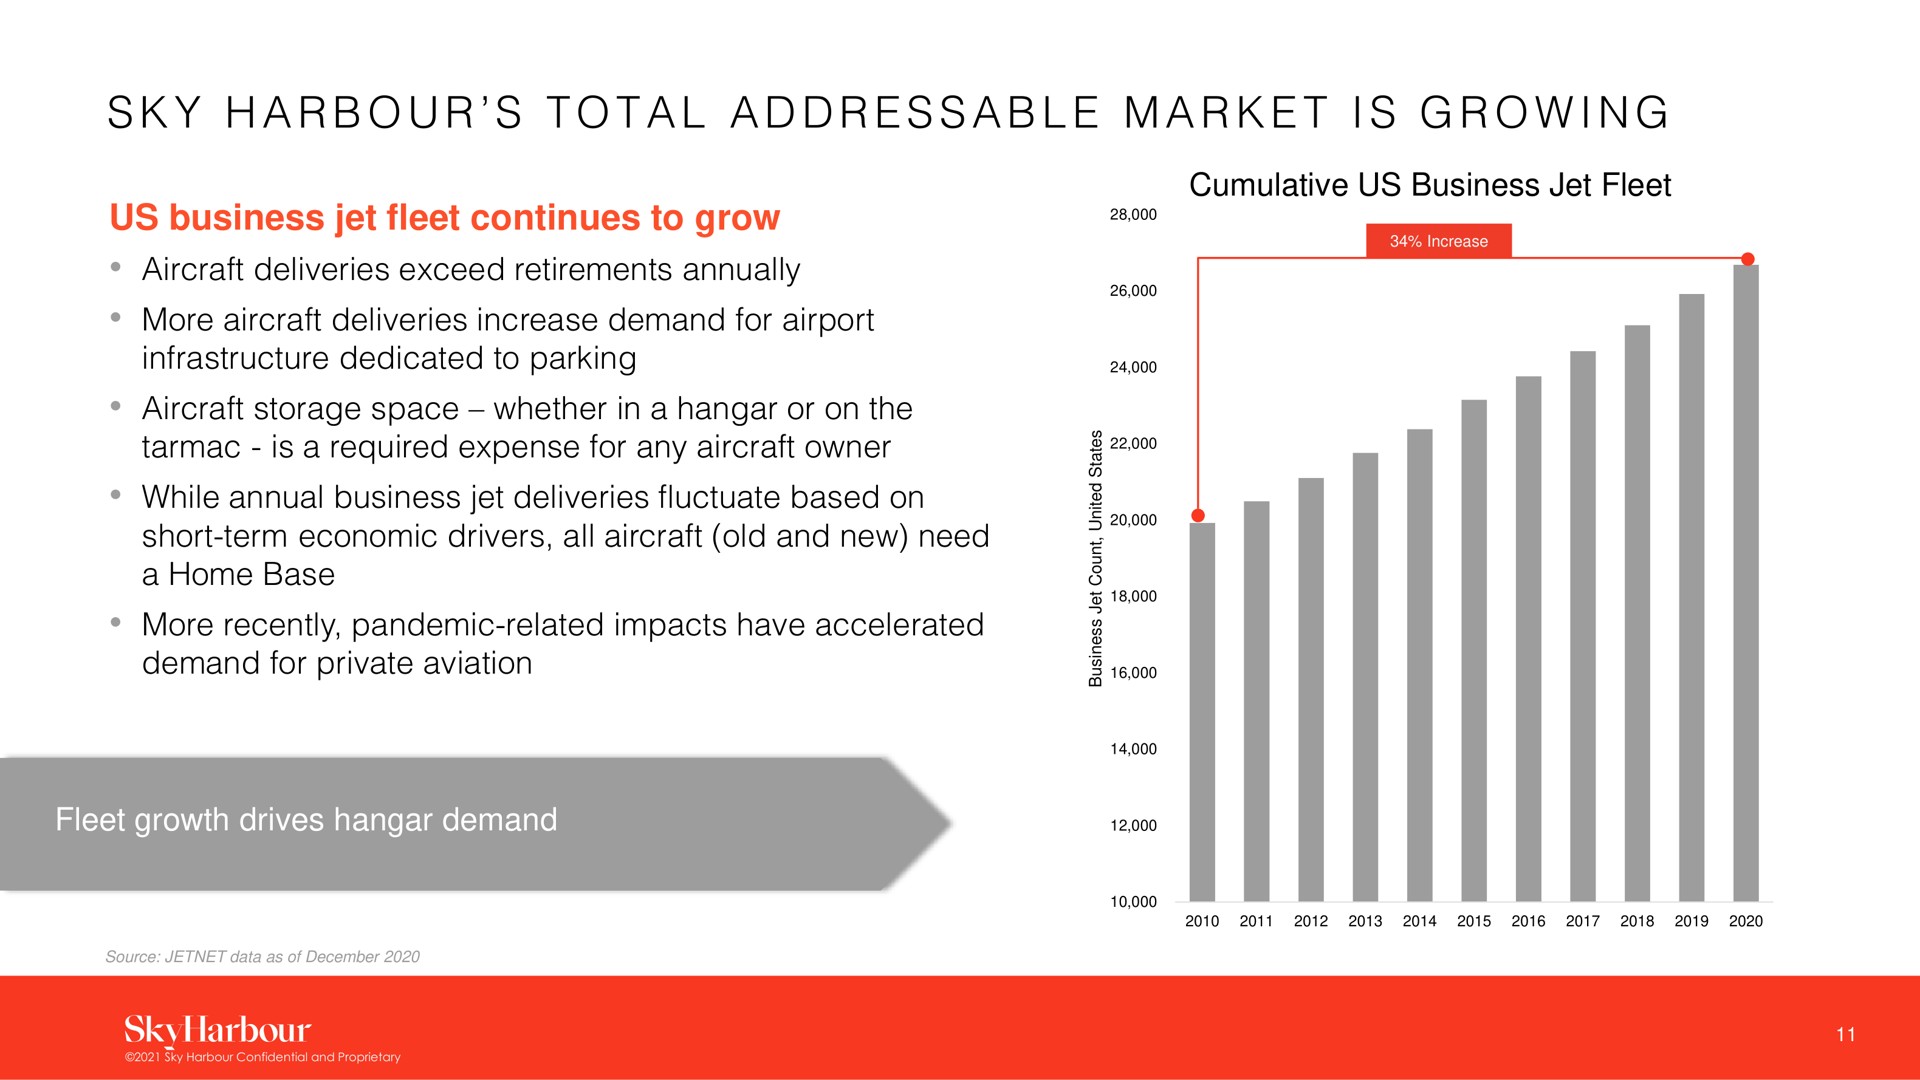 a a a a a i i sky harbour total market is growing | SkyHarbour